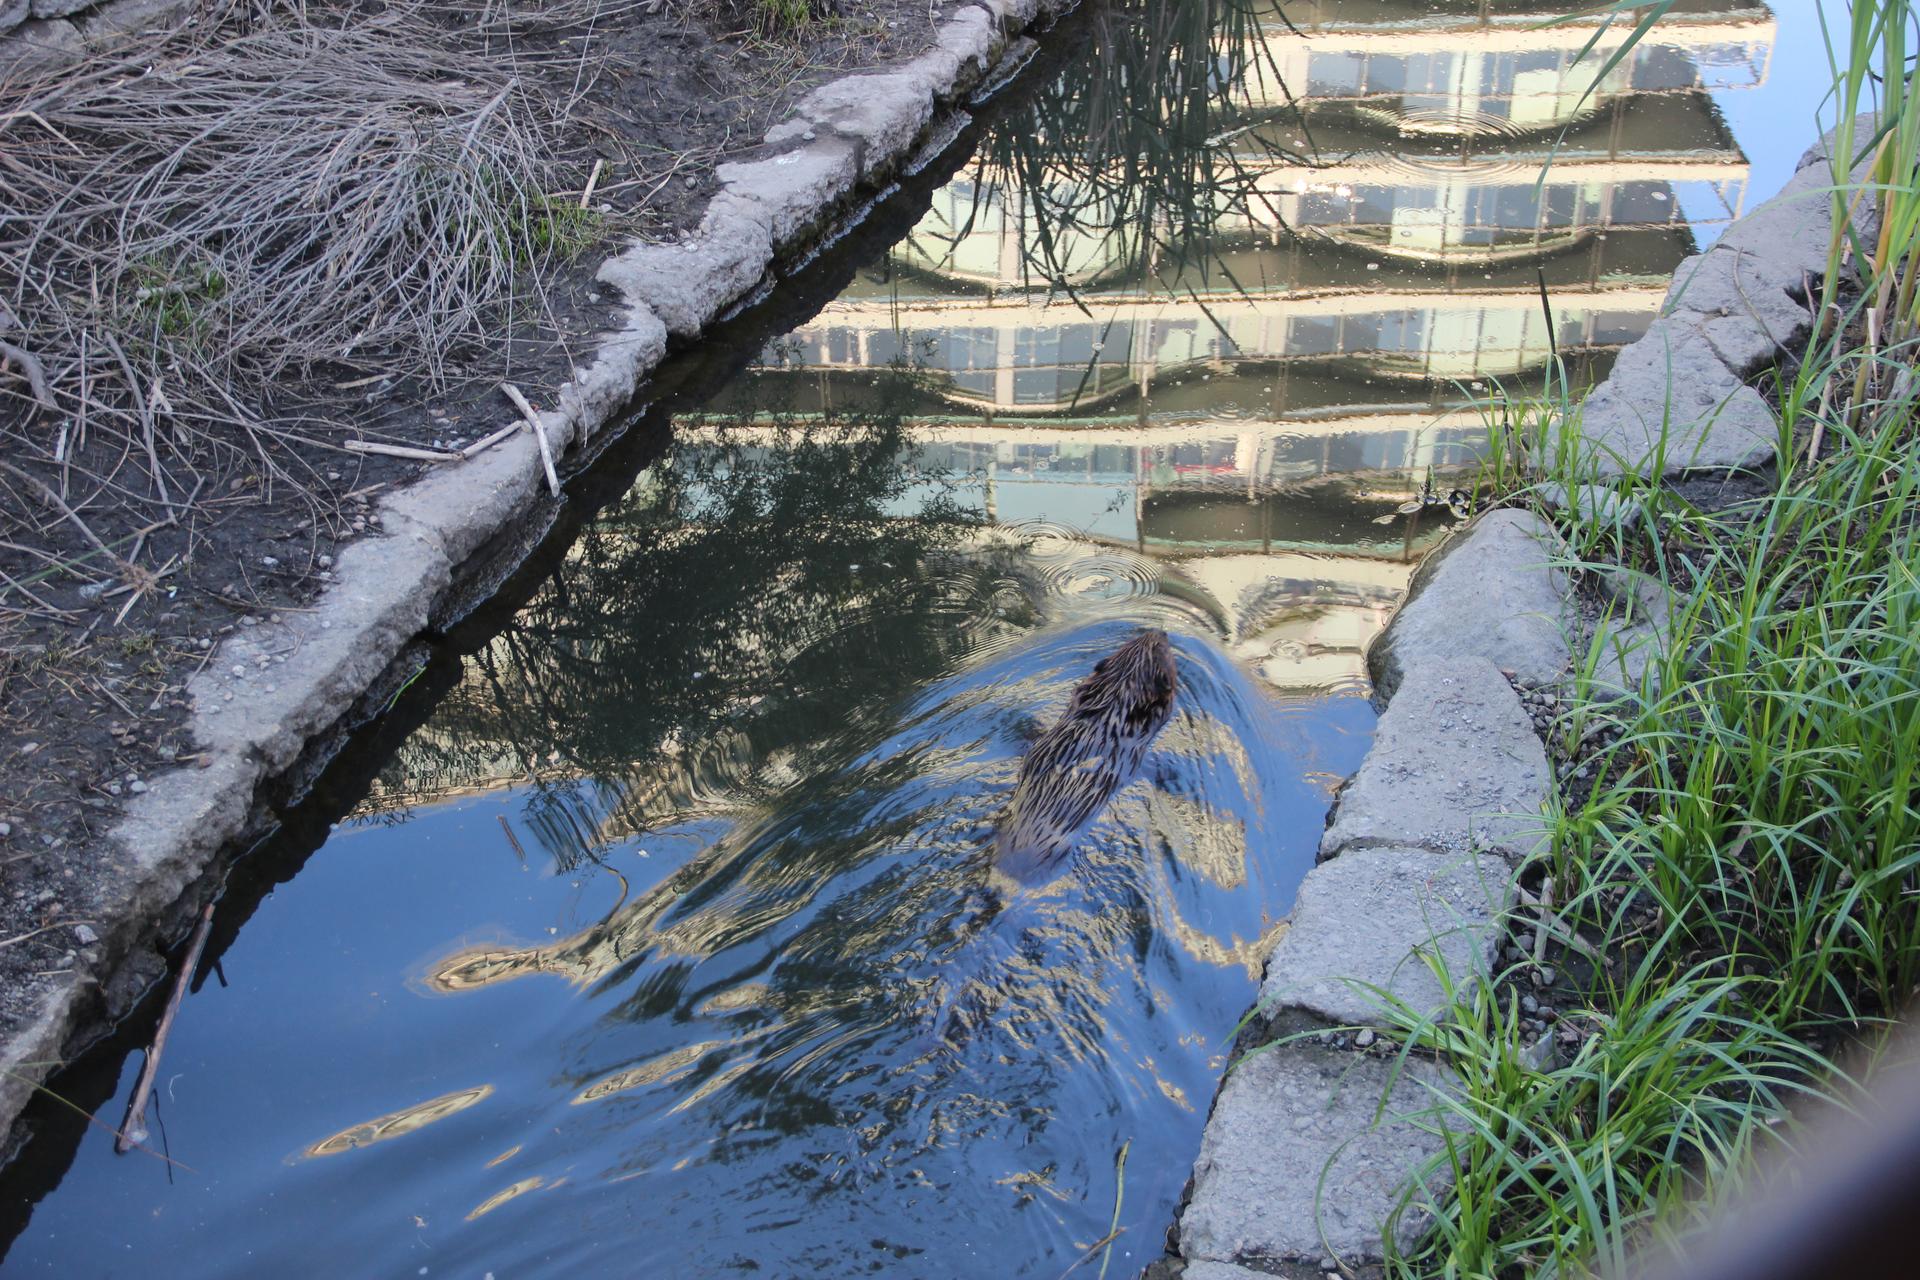 An urban beaver going for a swim in Vancouver's Hinge Park.